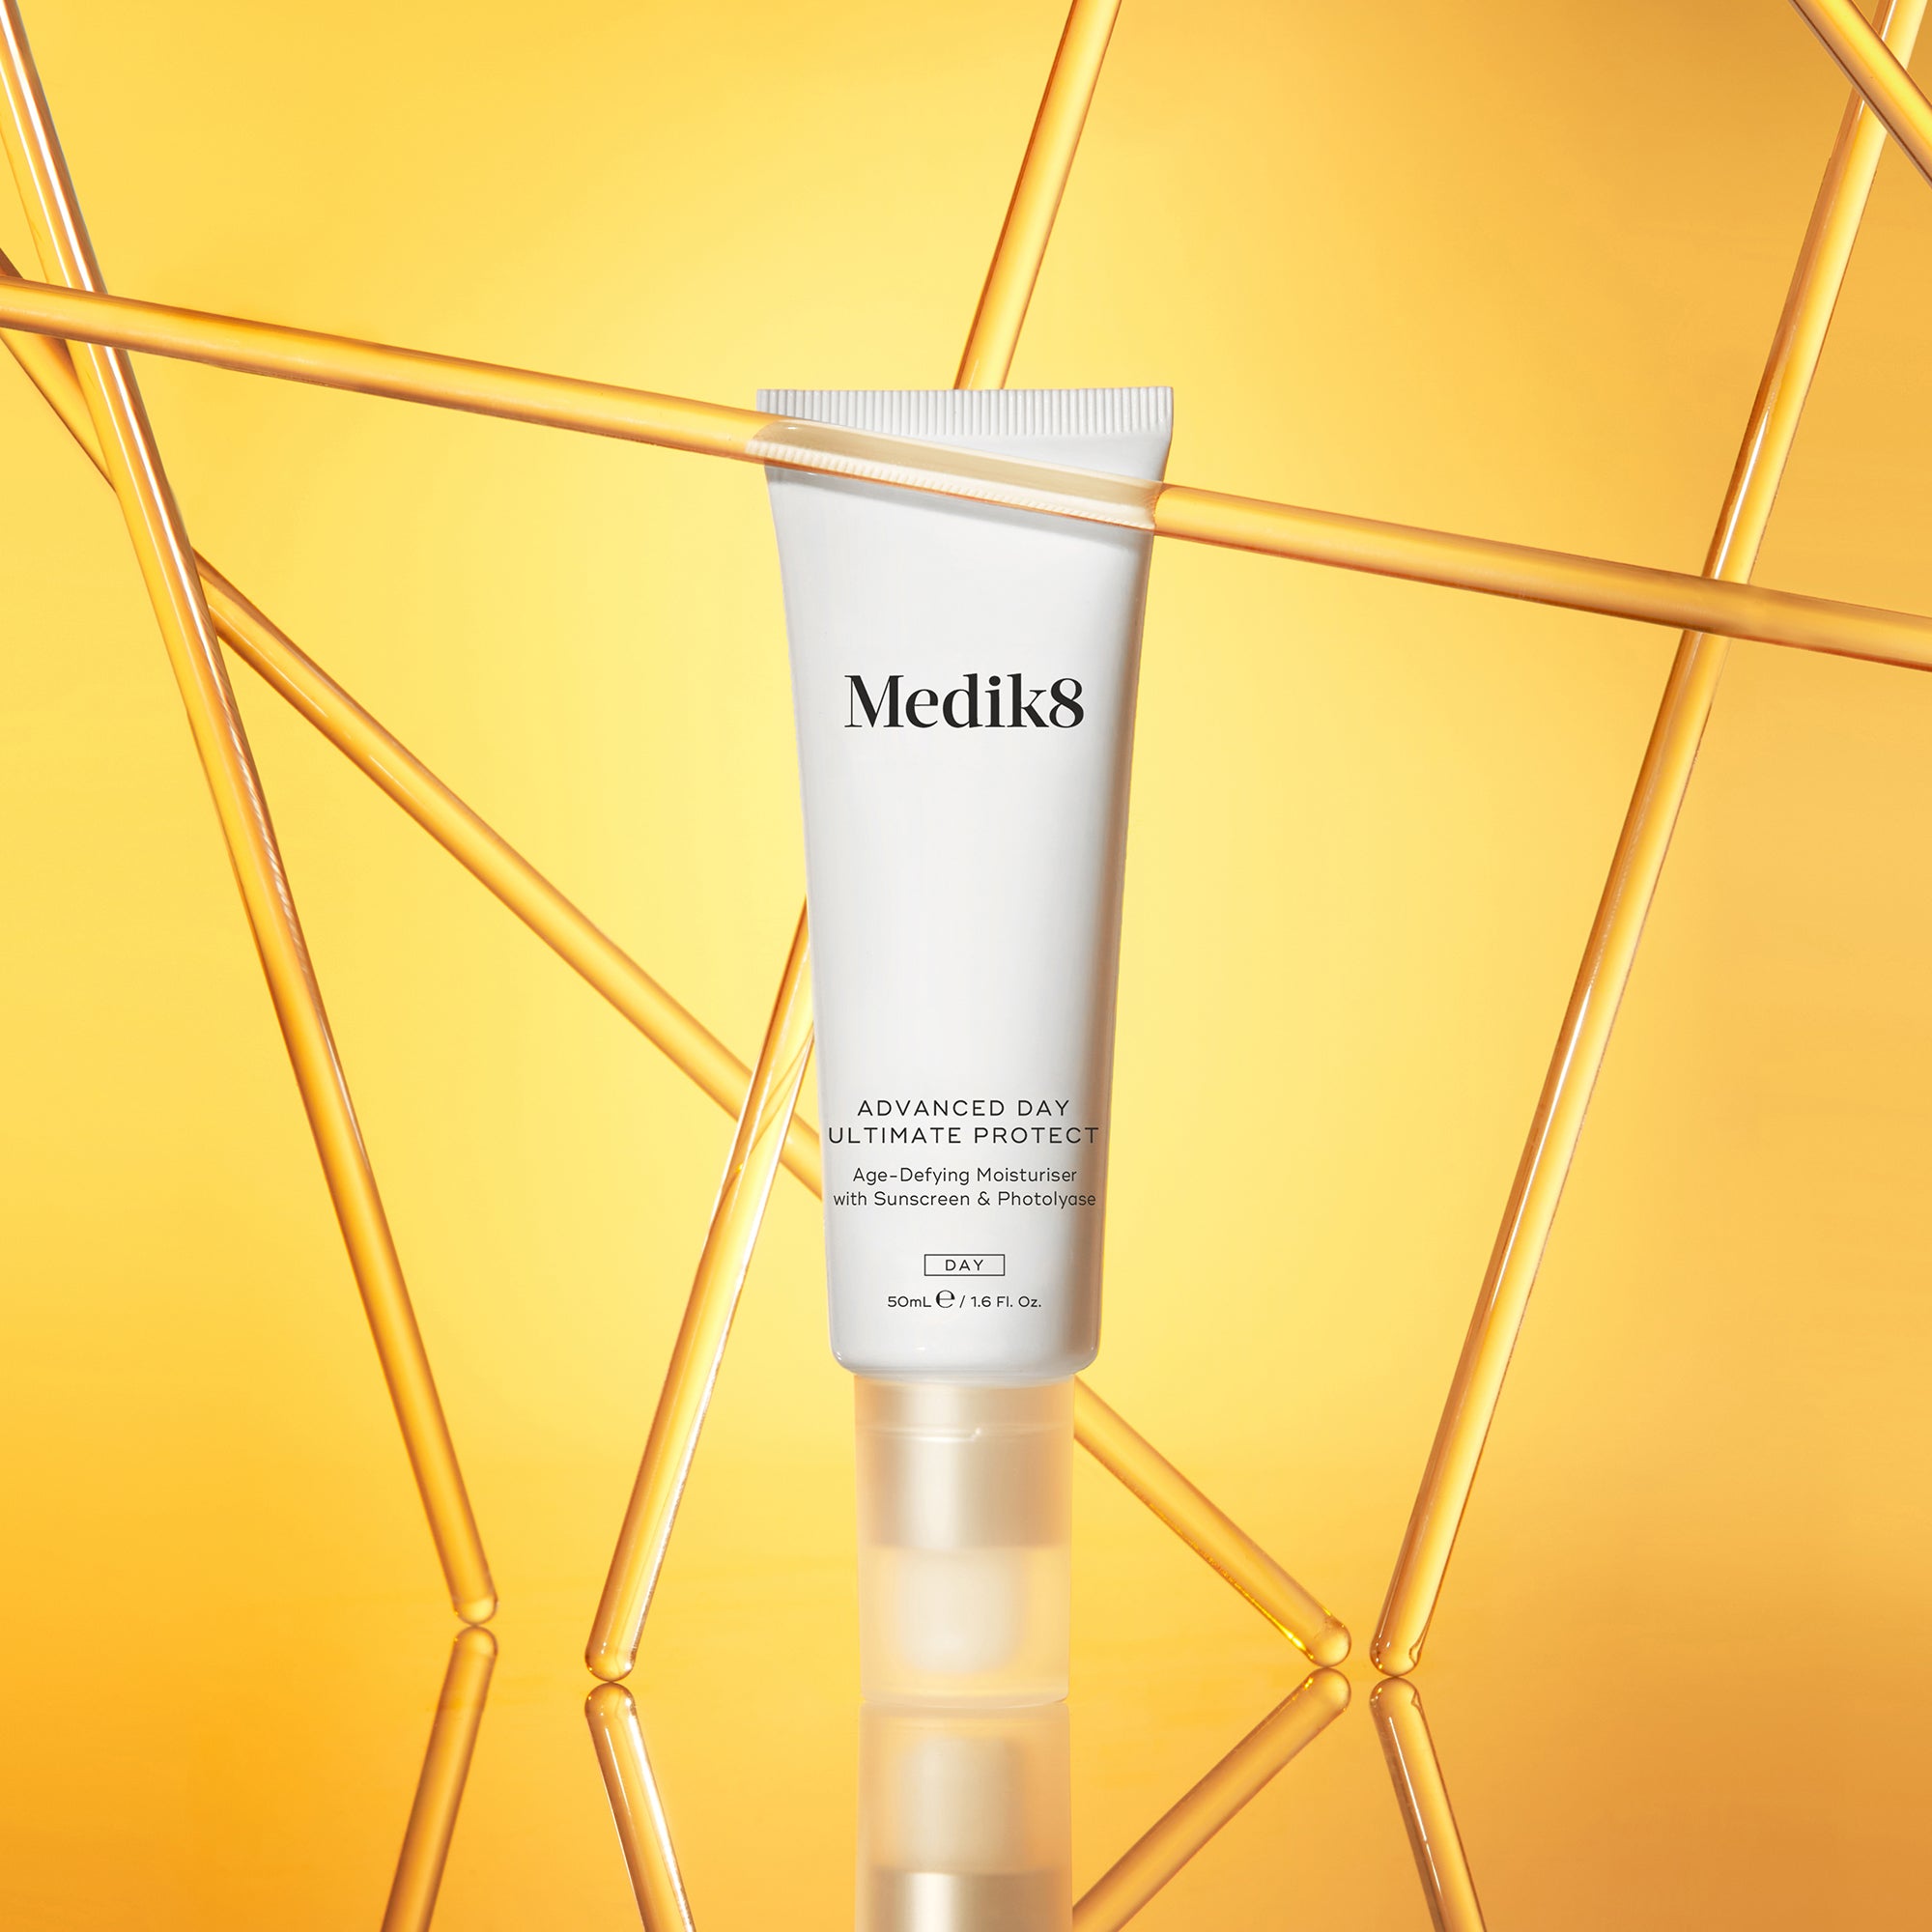 Advanced Day Ultimate Protect™ by Medik8. An Anti-Defying Moisturiser with Photolyase